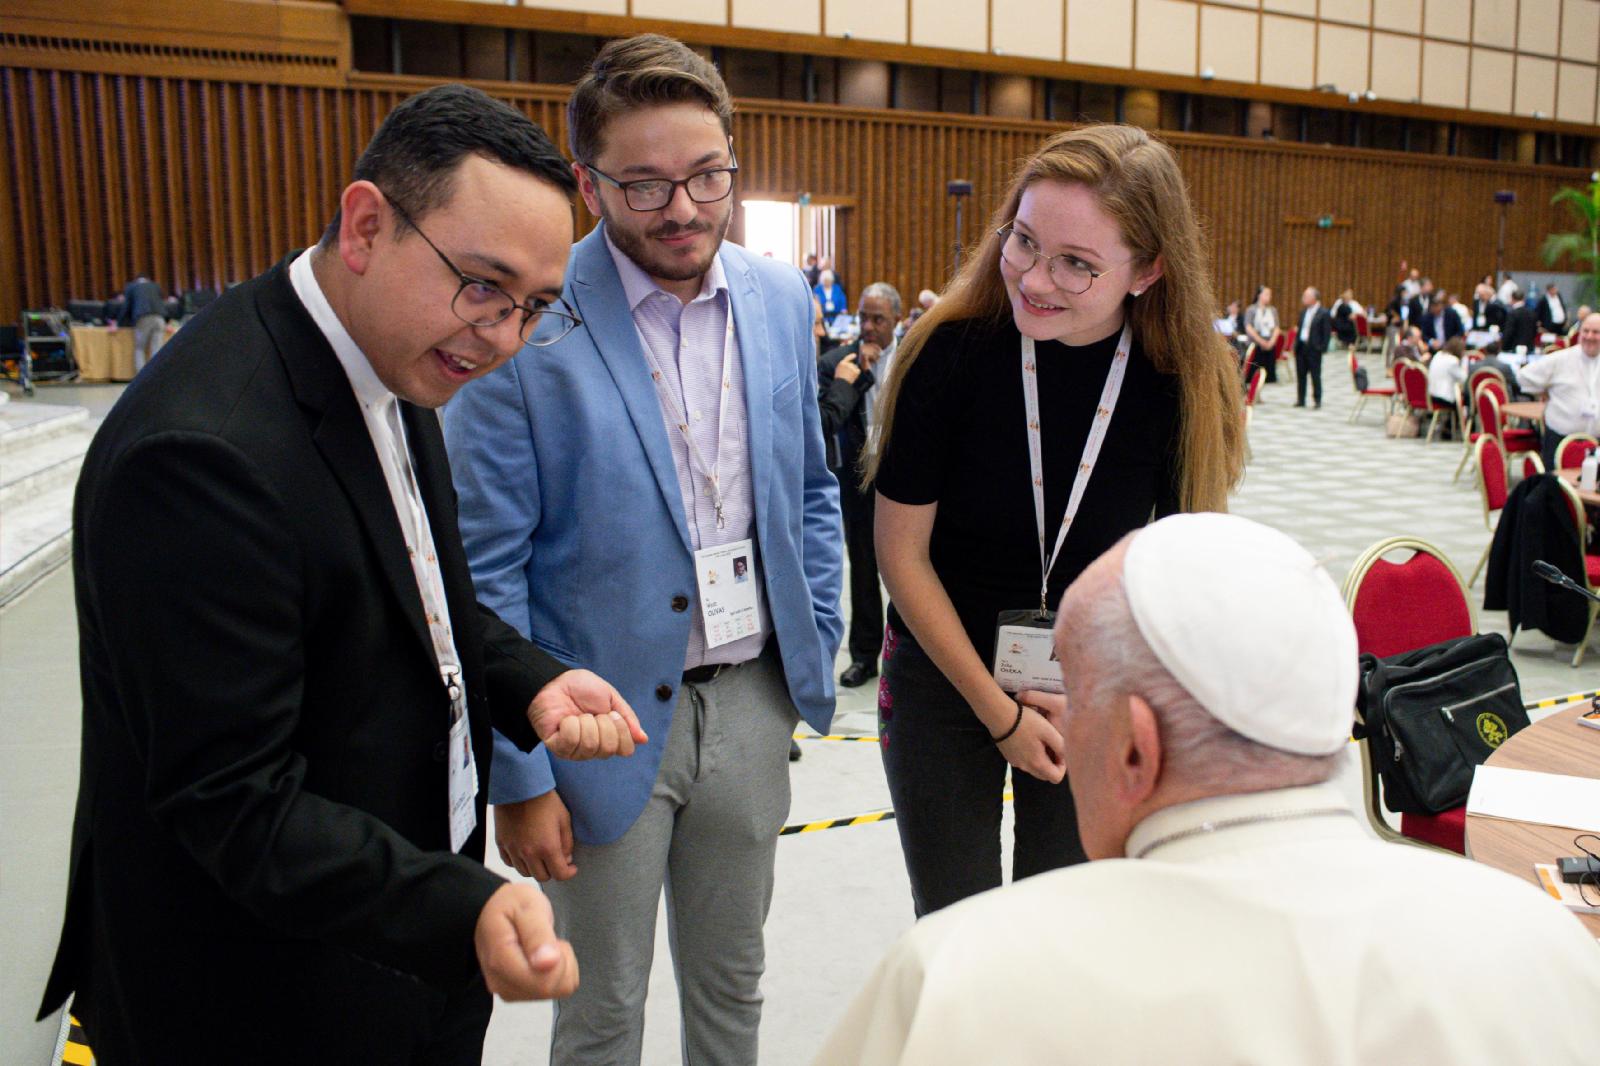 Pope Francis with U.S. synod members